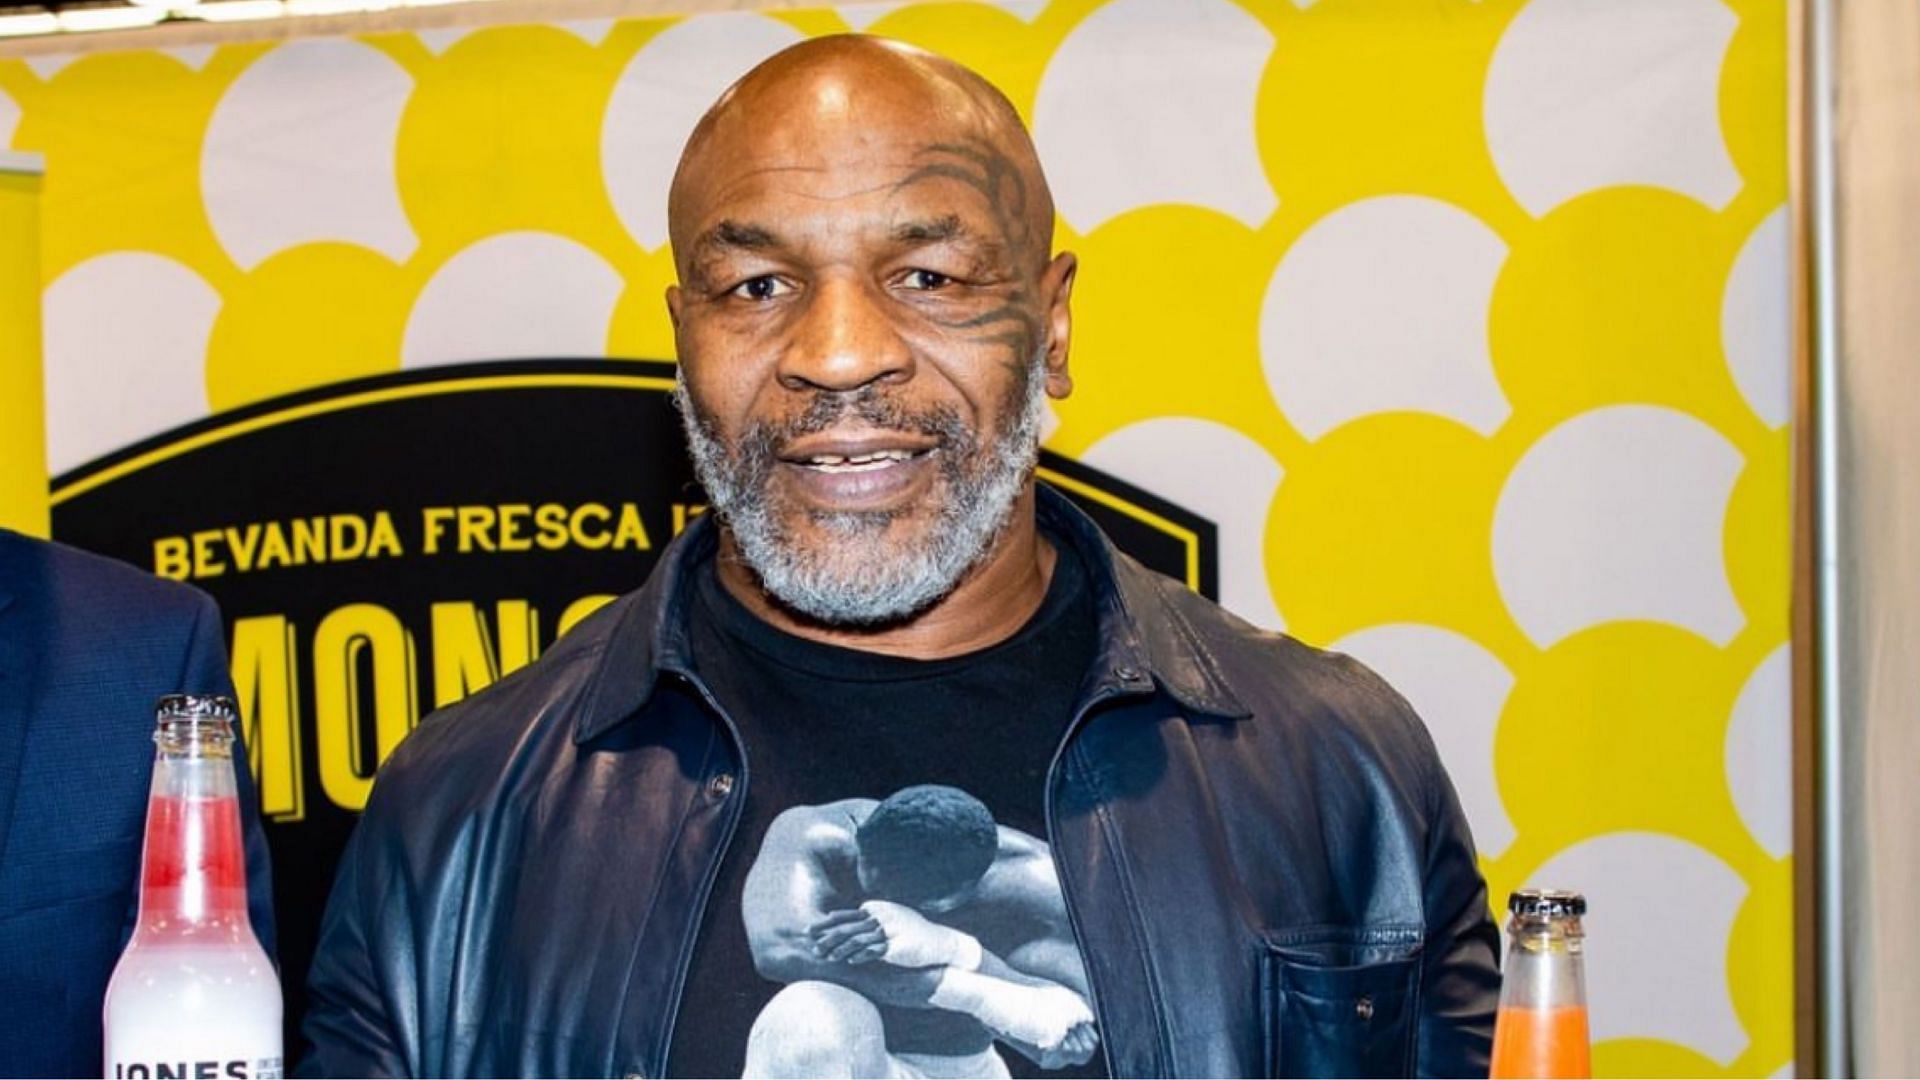 Mike Tyson (@miketyson) [image courtesy of Instagram]